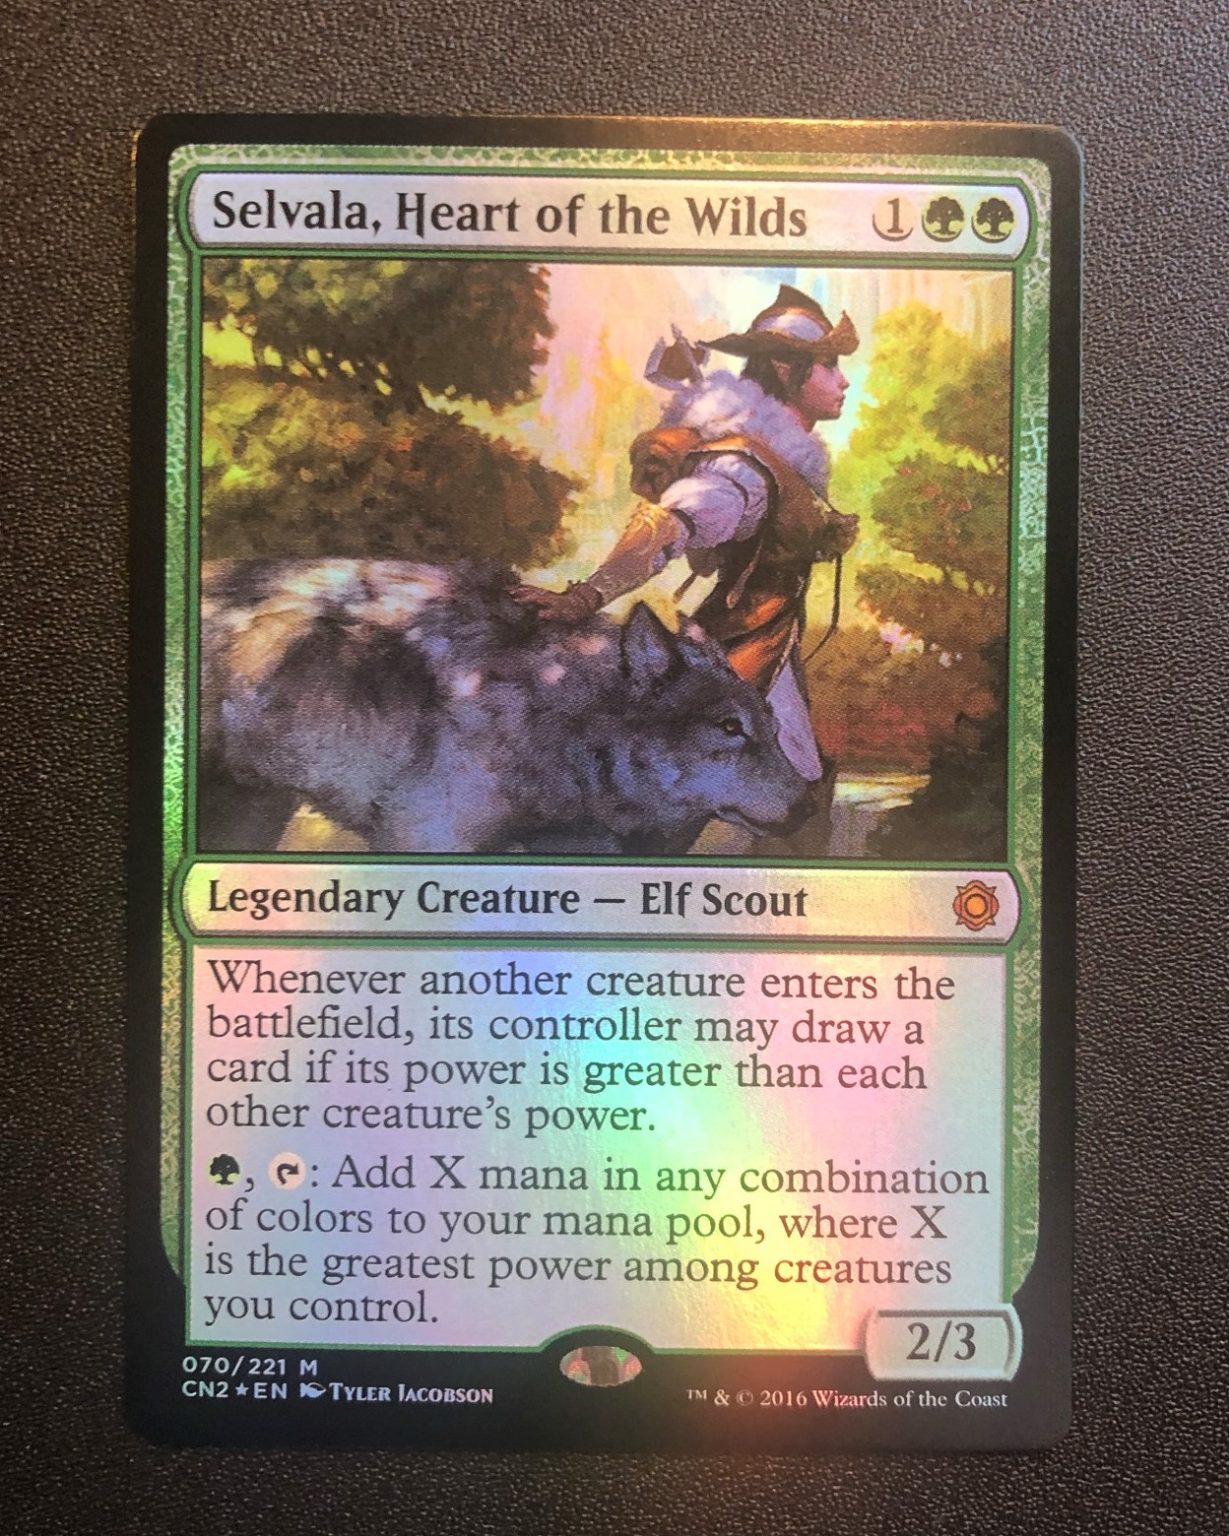 competative selvala heart of the wilds cedh selvala heart of the wilds reddit